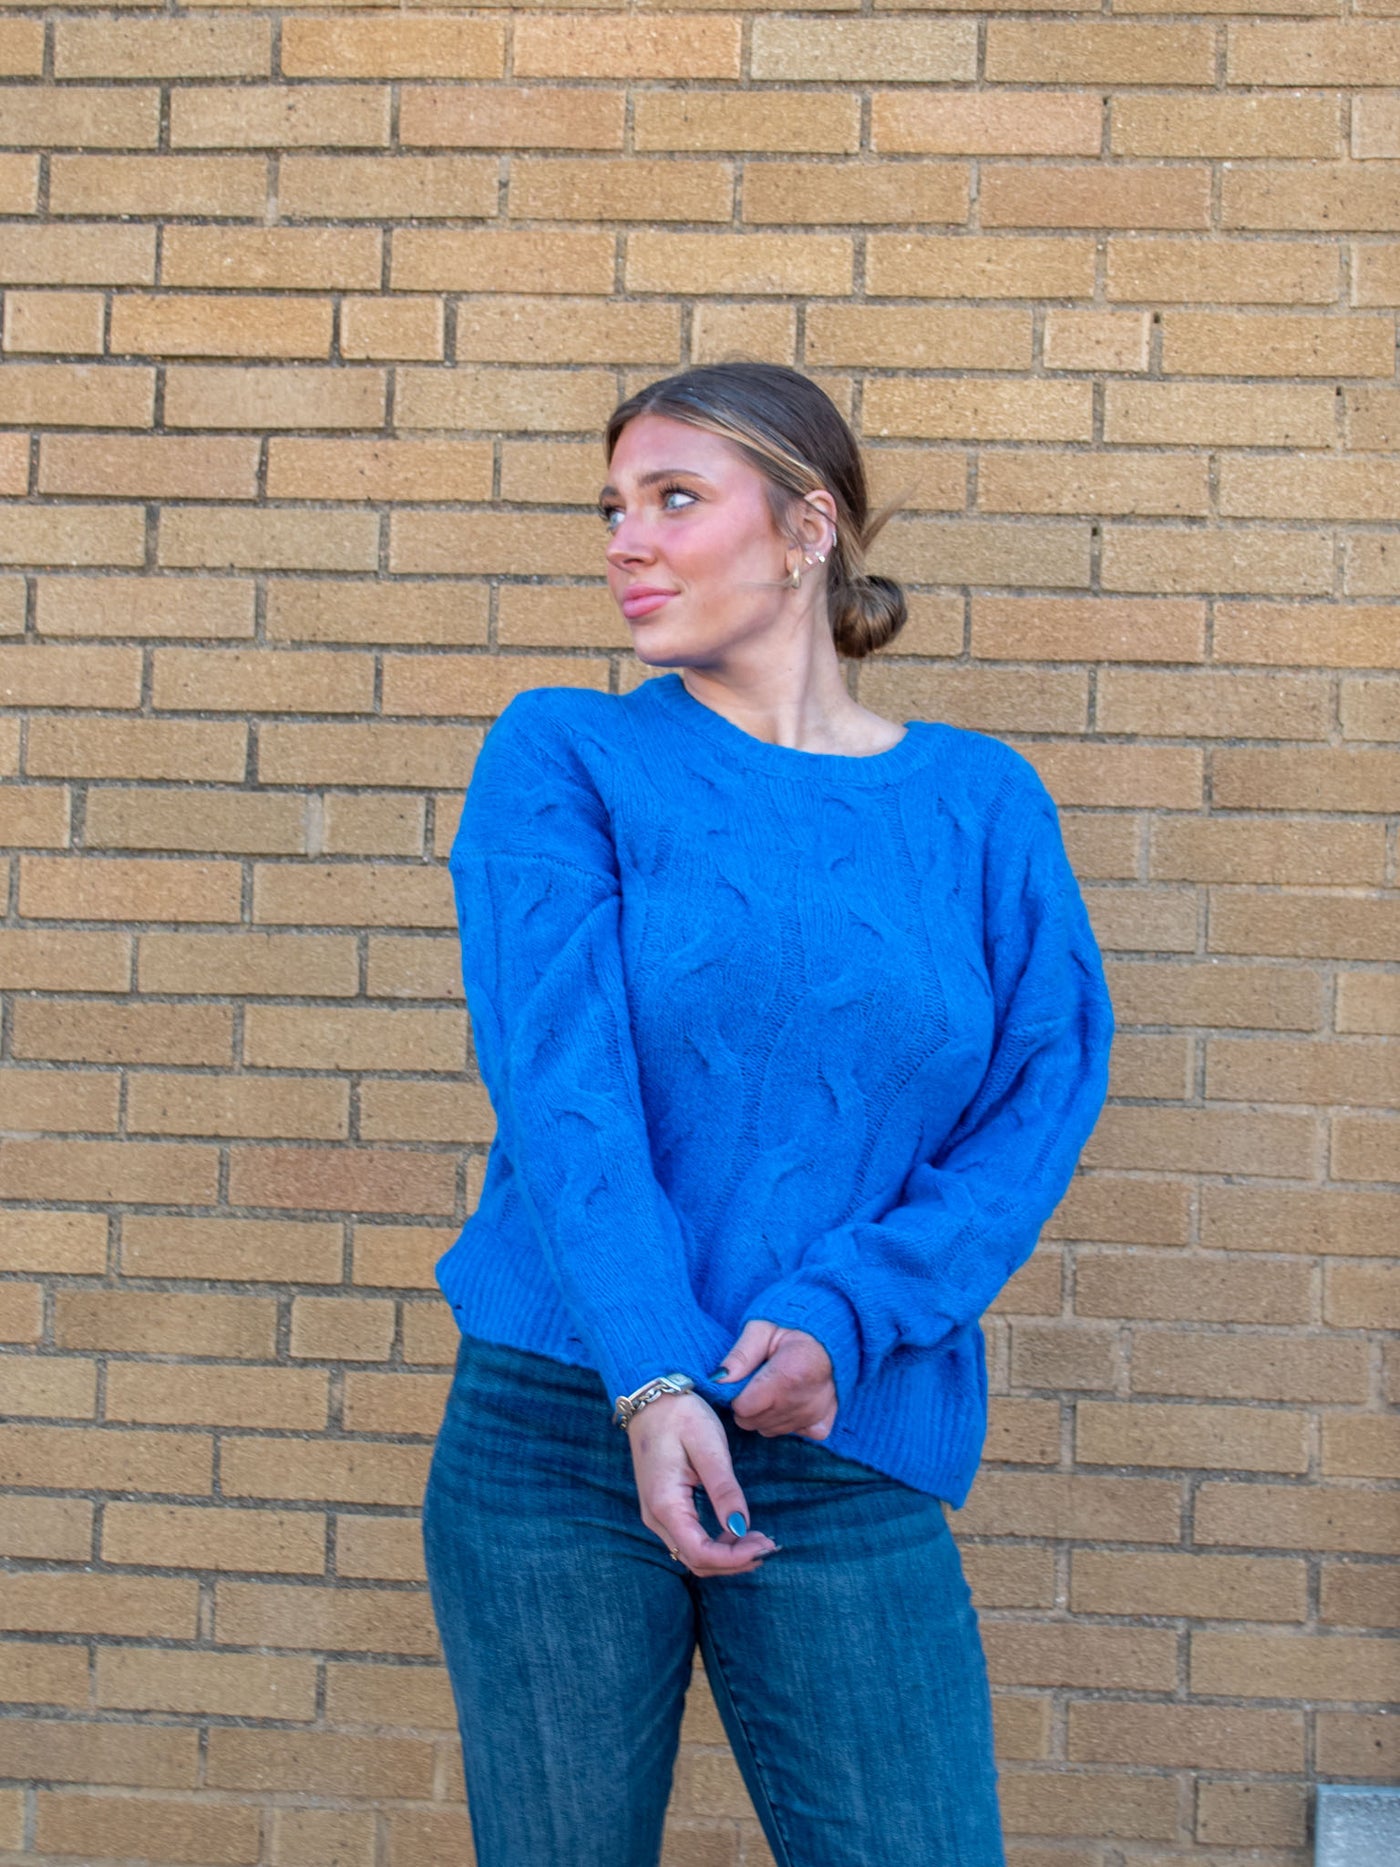 A model wearing a blue cable knit sweater with distressing on the hem. The model has it paired with a dark wash jean.